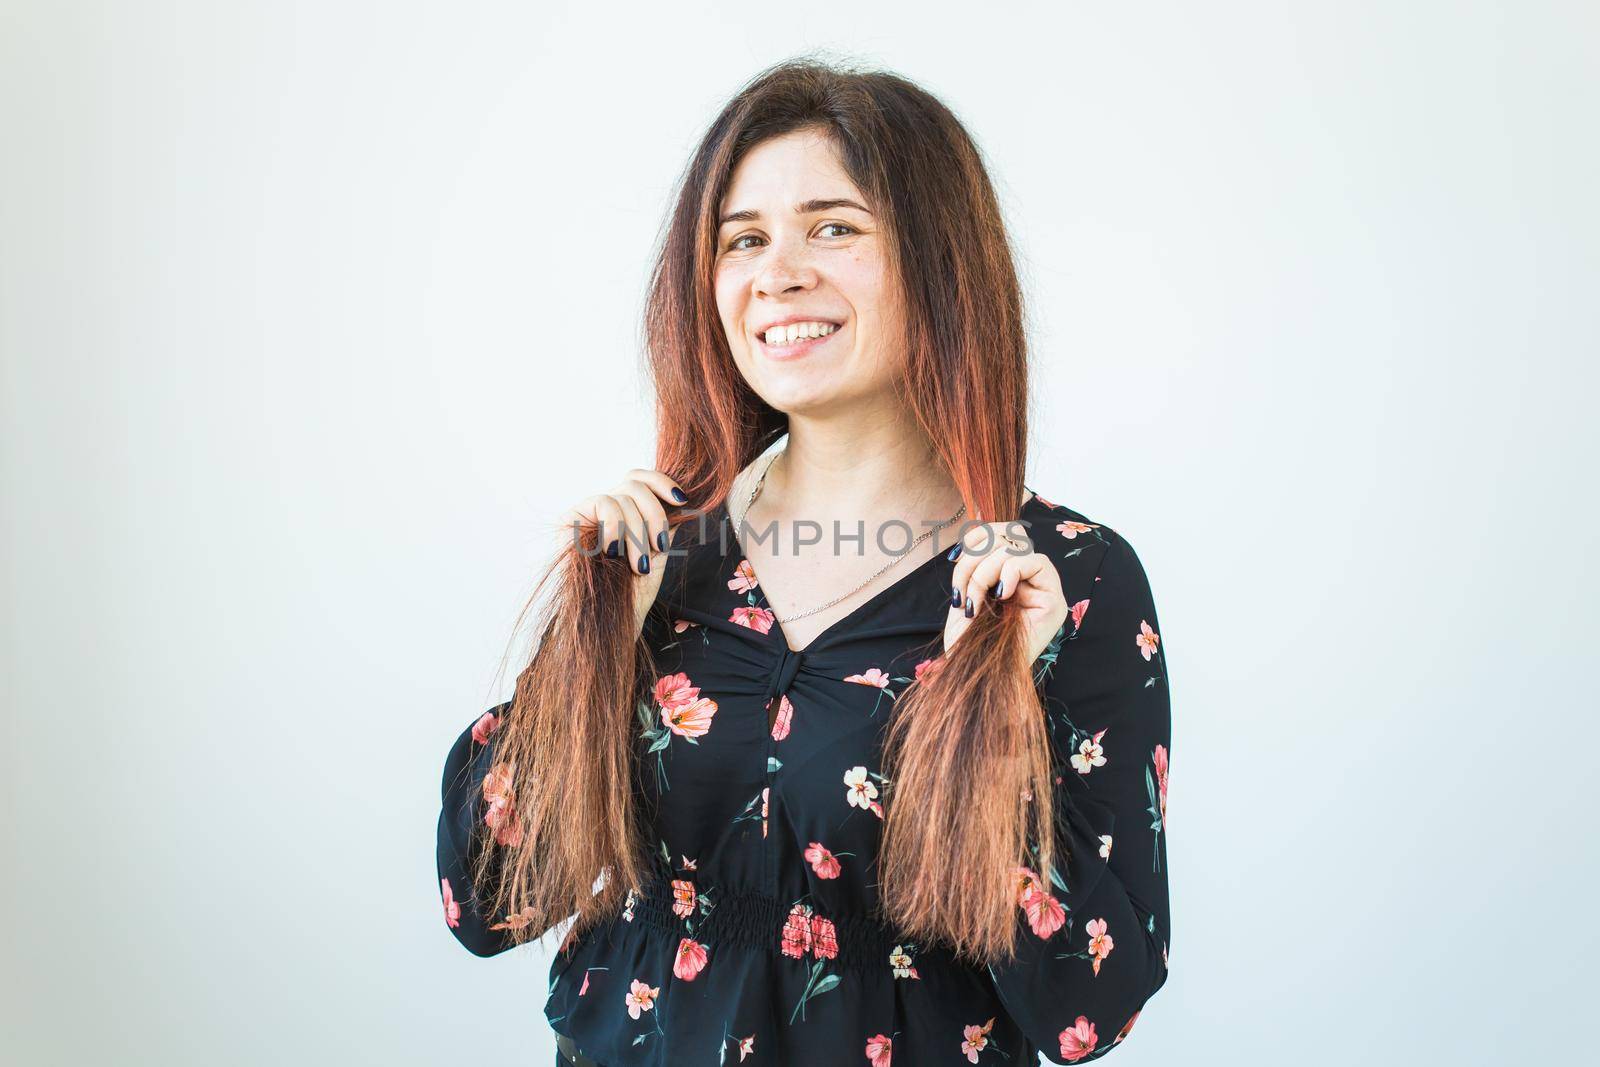 Playful and happy funny redhead woman having fun laughing on a white background. by Satura86